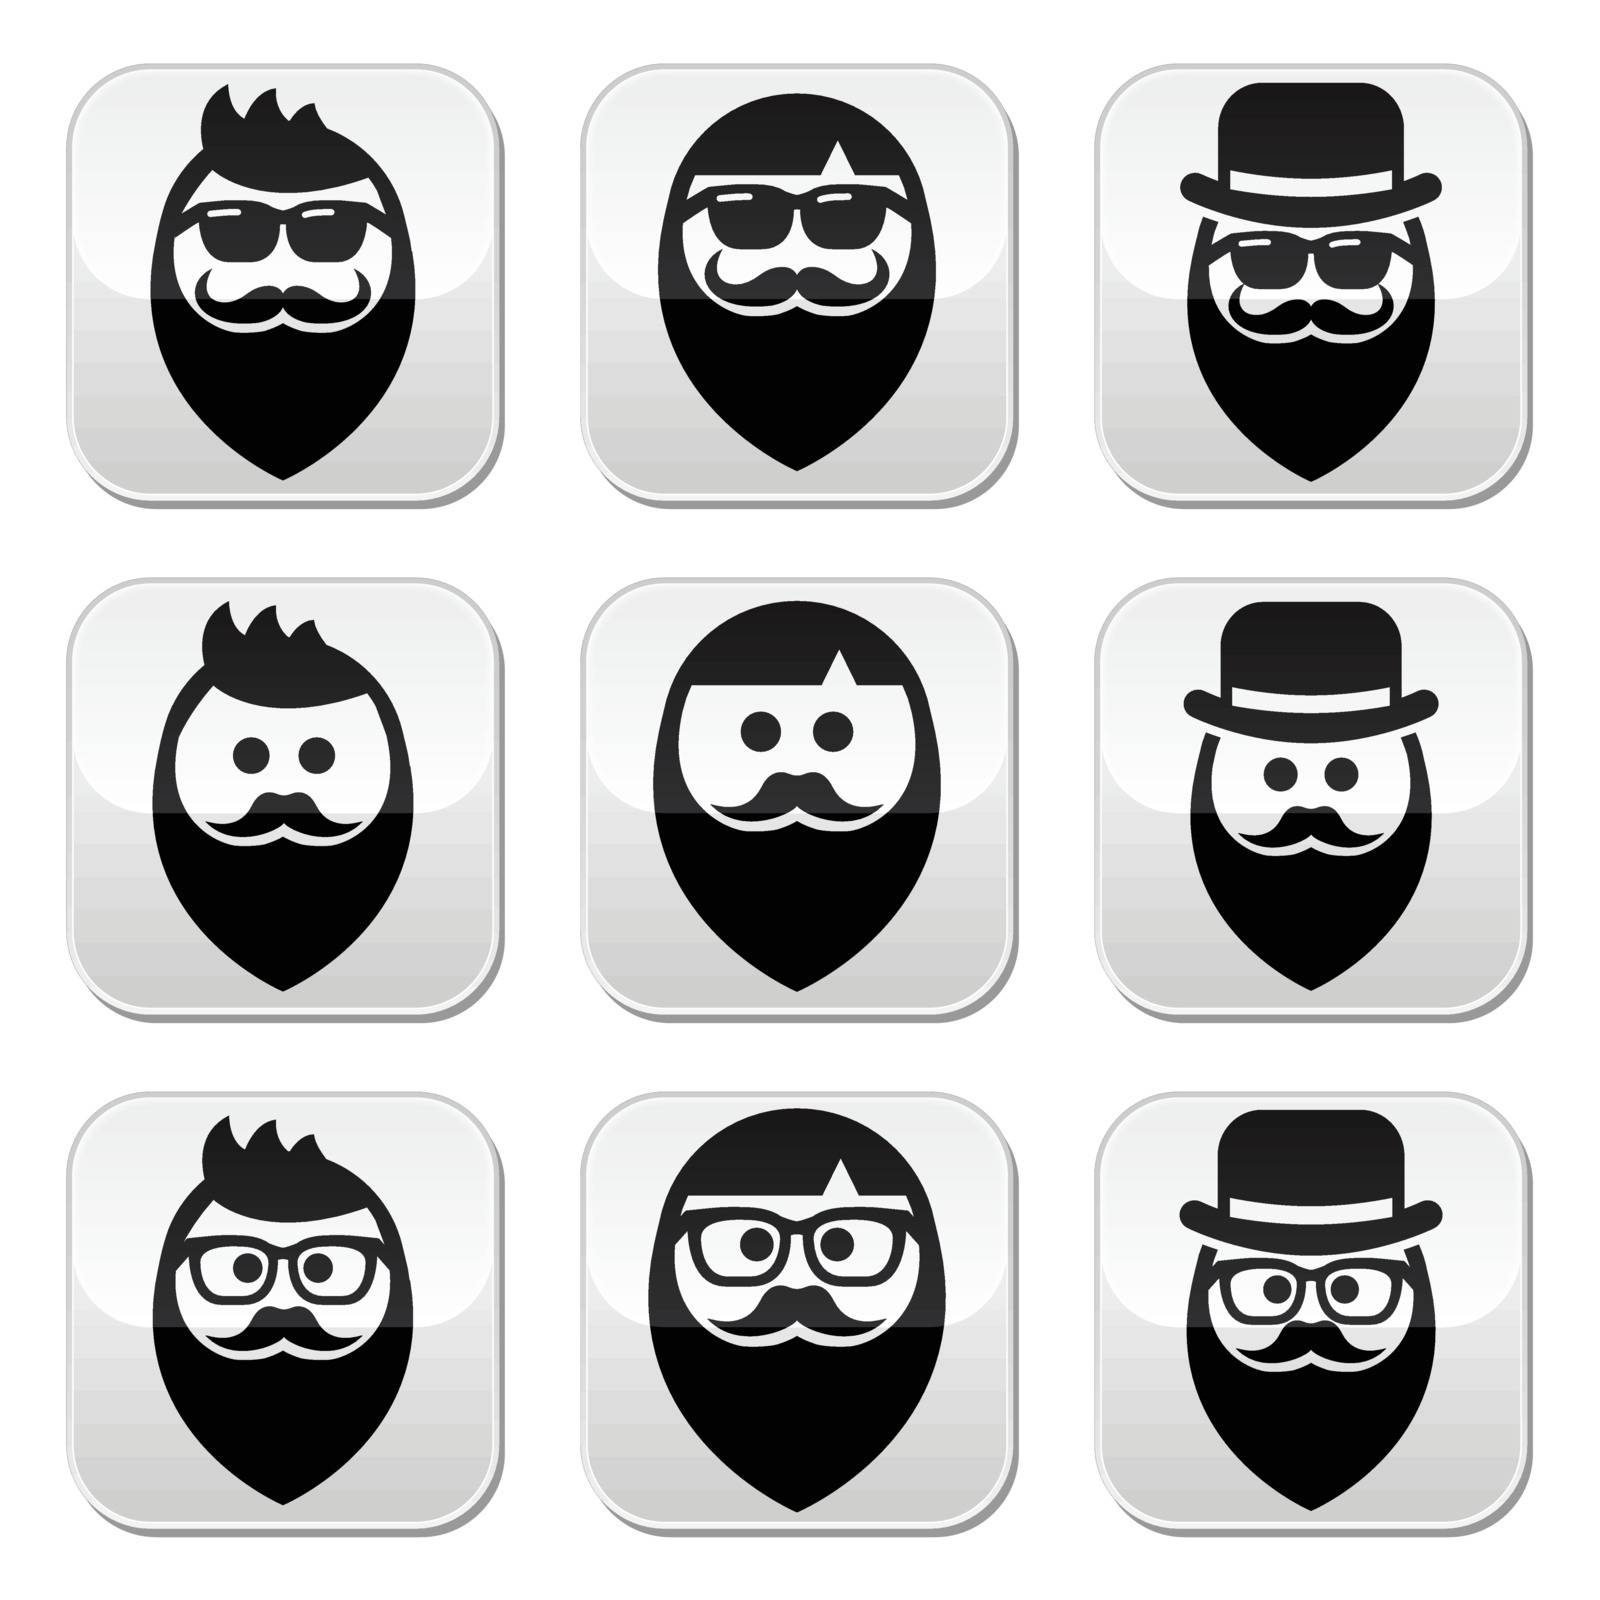 People with beard in glasses, sunglasses and hat vector buttons set isolated on white